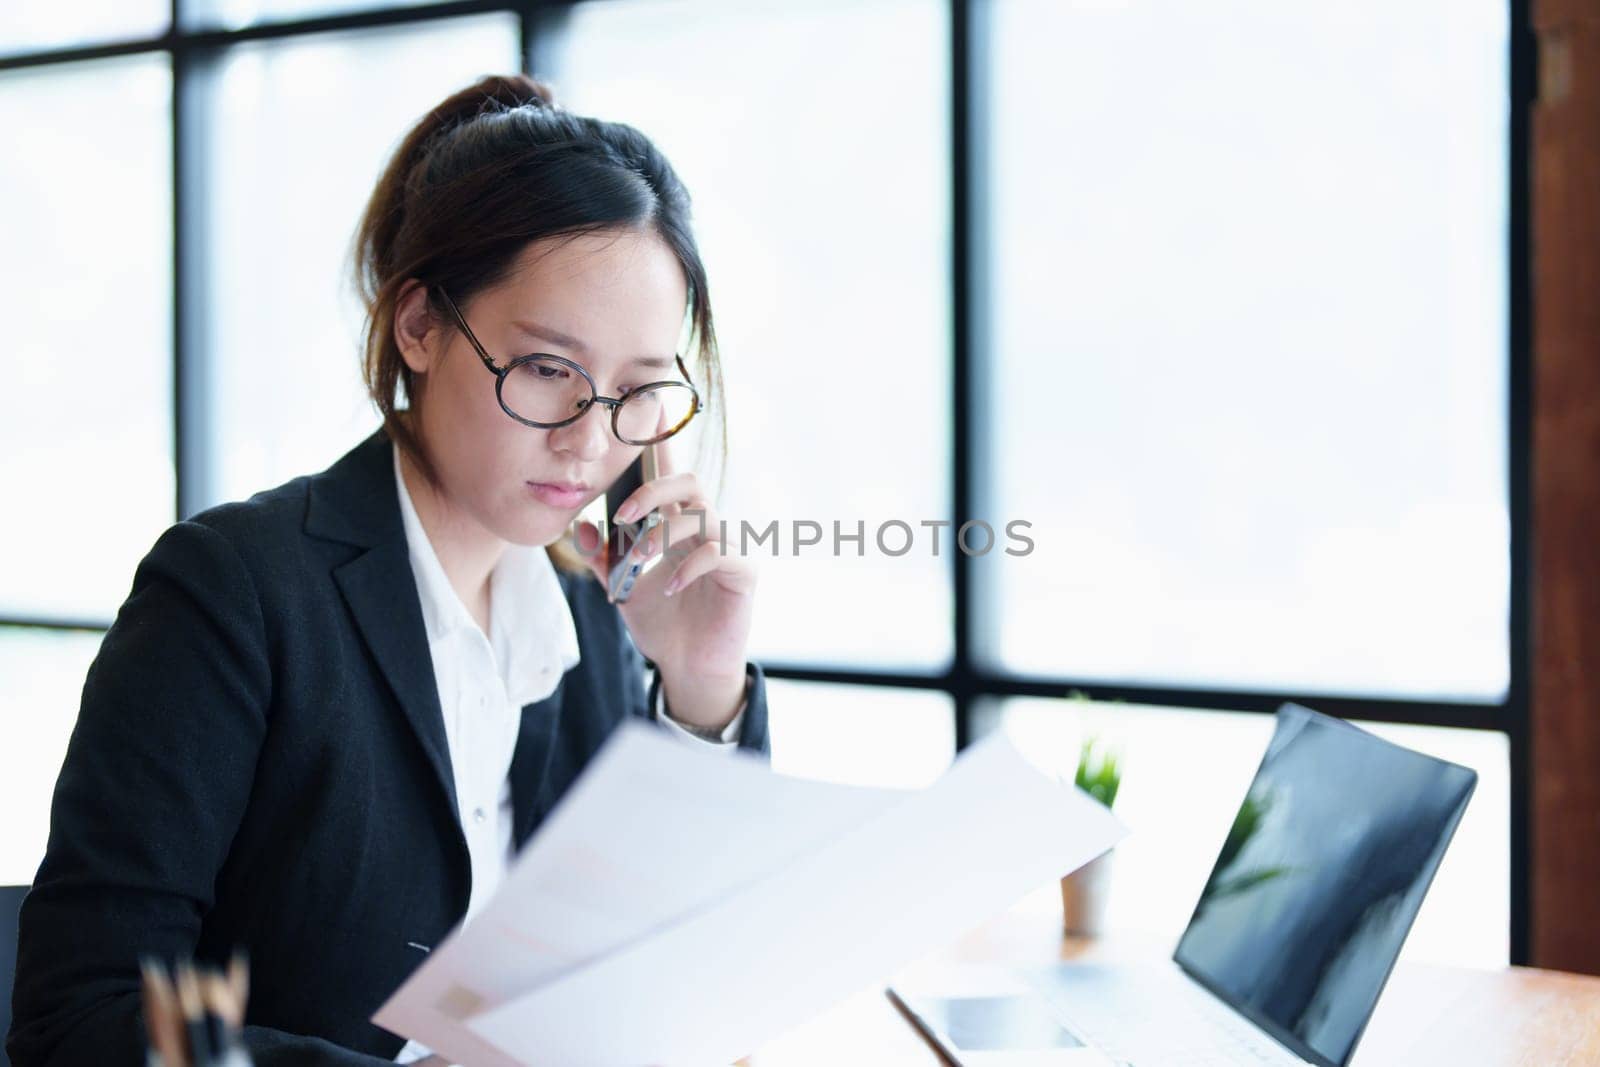 Portrait of a young Asian woman showing a serious face as she uses her phone, financial documents and computer laptop on her desk in the early morning hours.